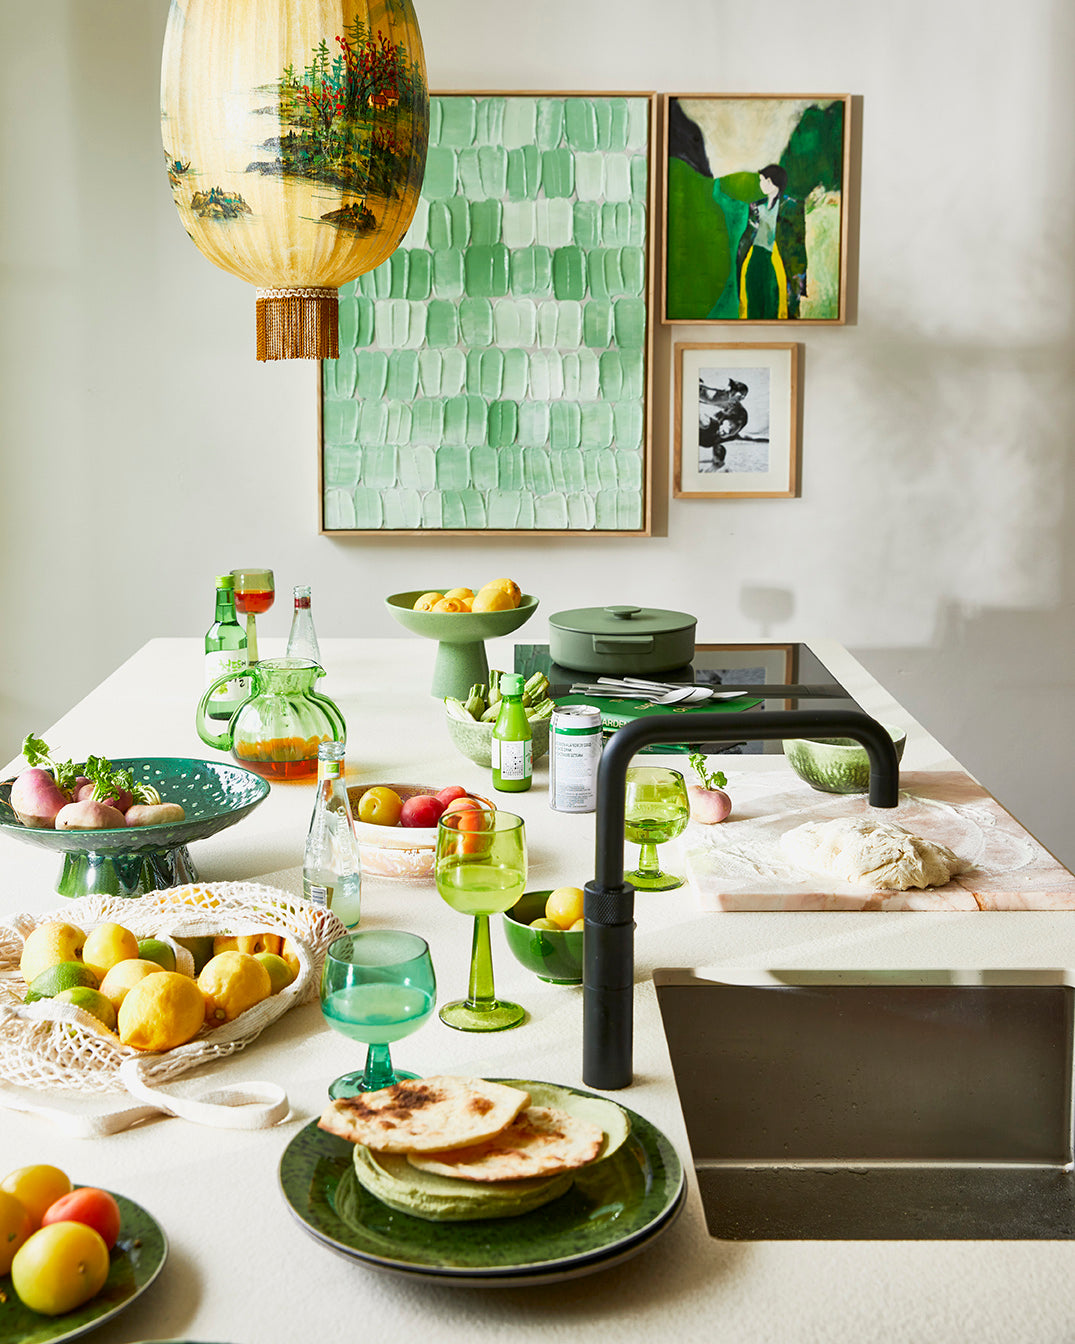 kitchen island with green colored server ware and art works on the wall